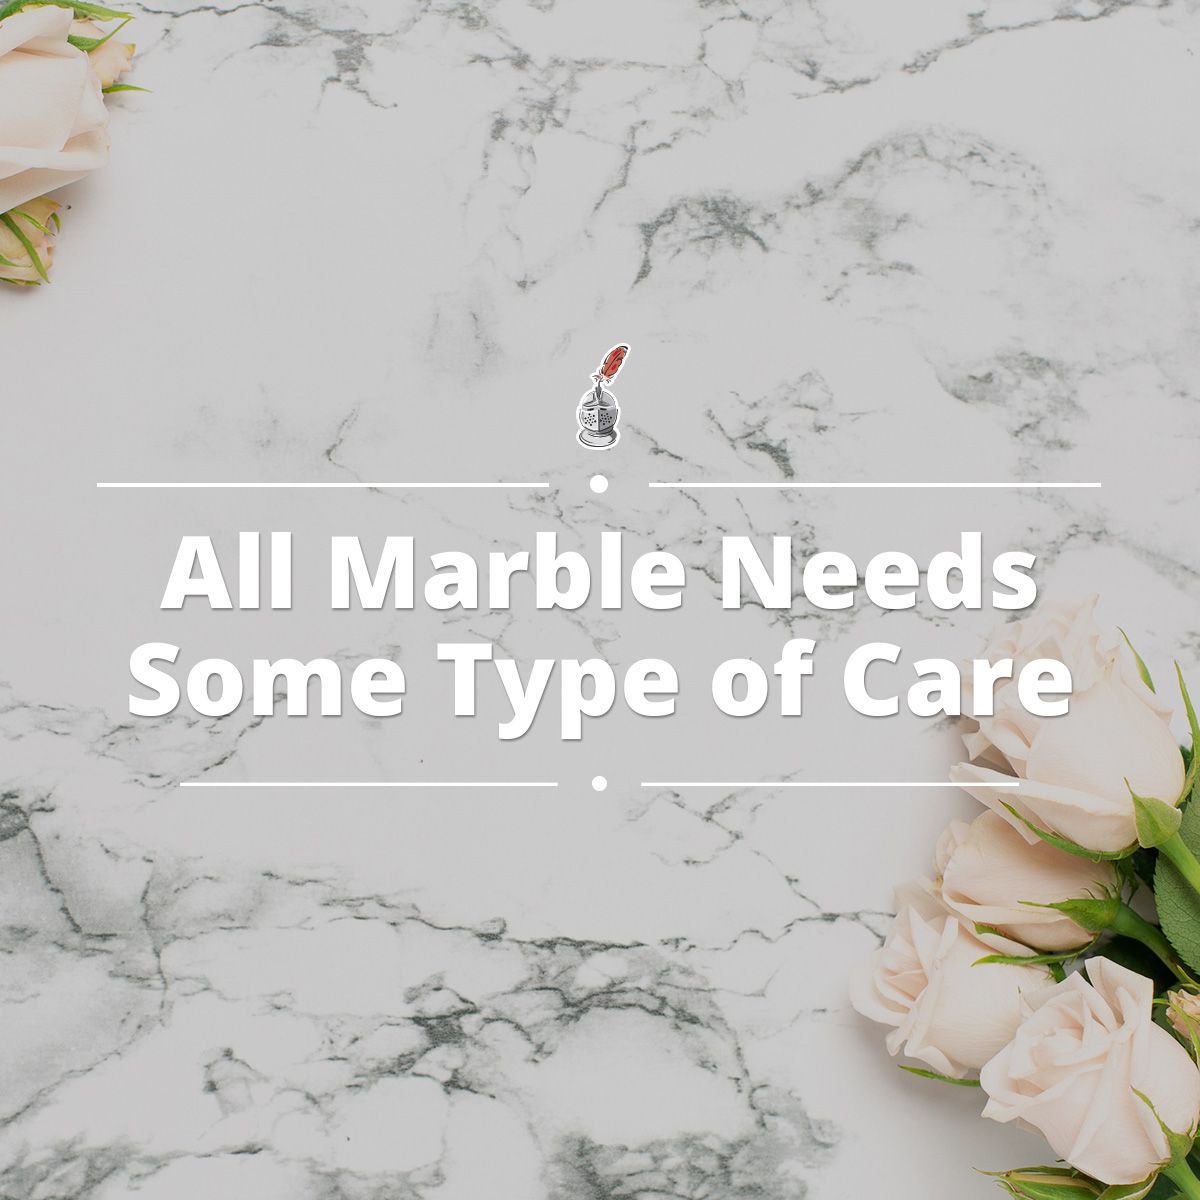 All Marble Needs Some Type of Care